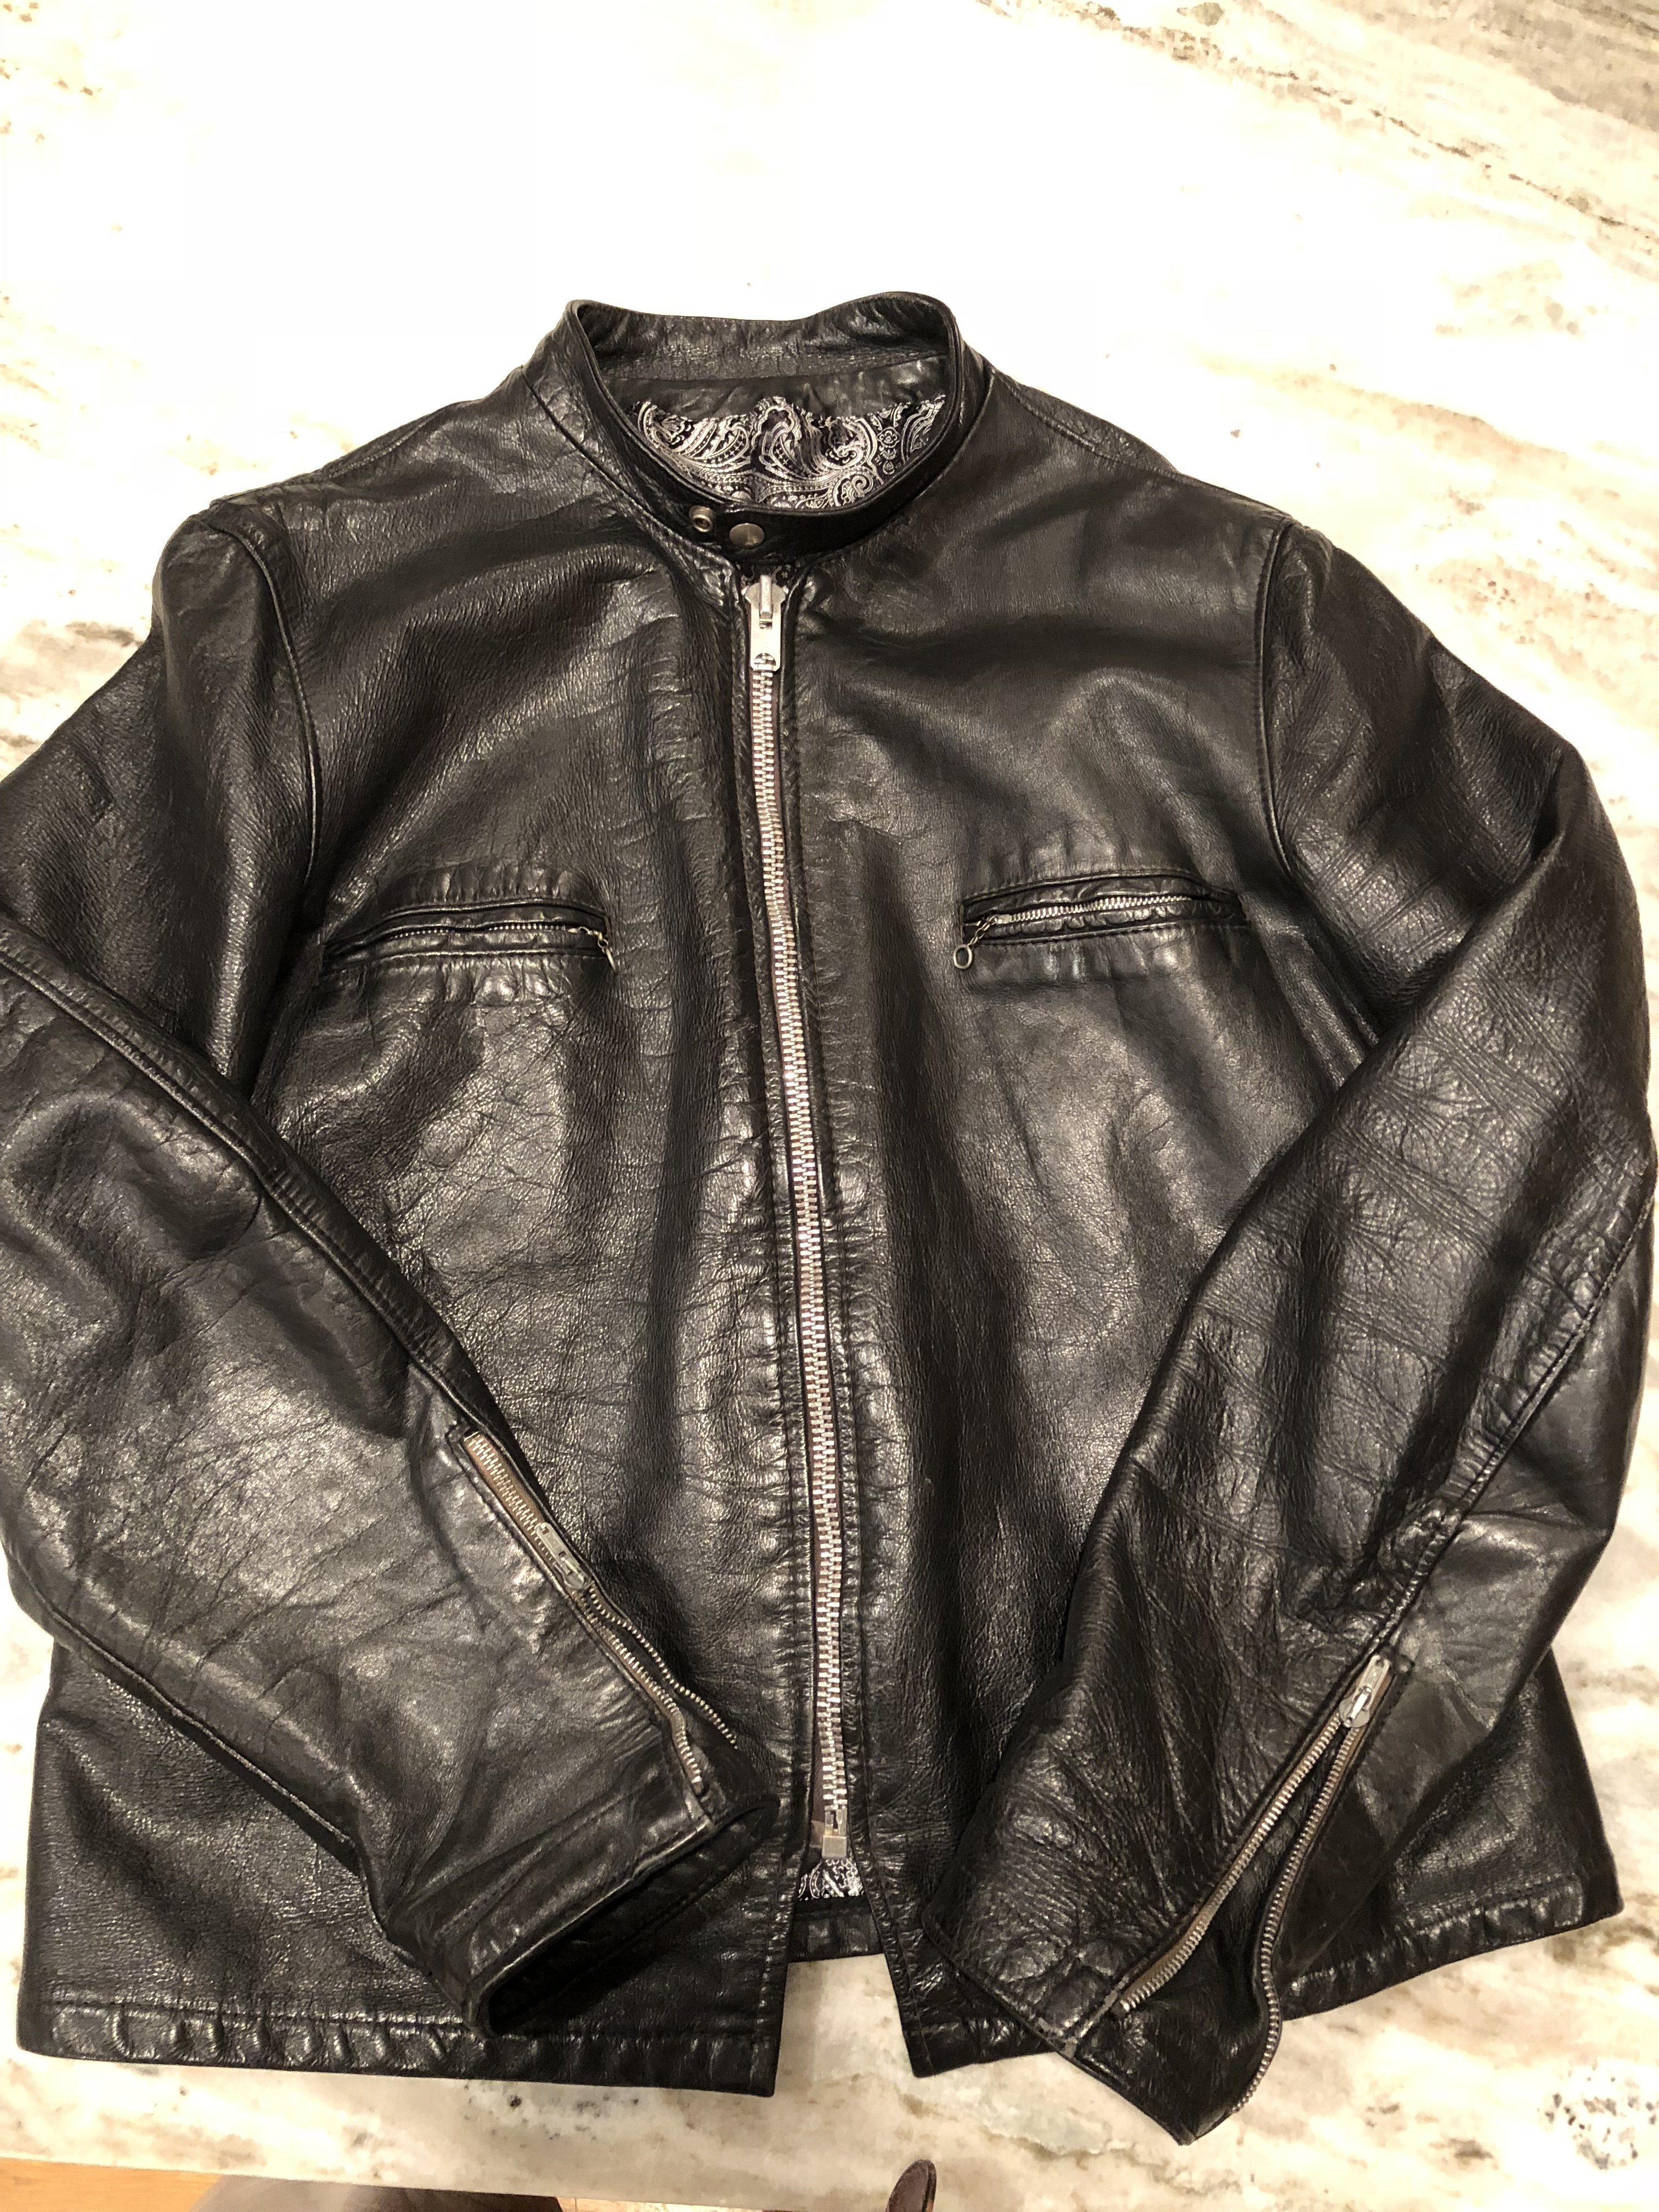 ID my Cafe Racer Please | Vintage Leather Jackets Forum